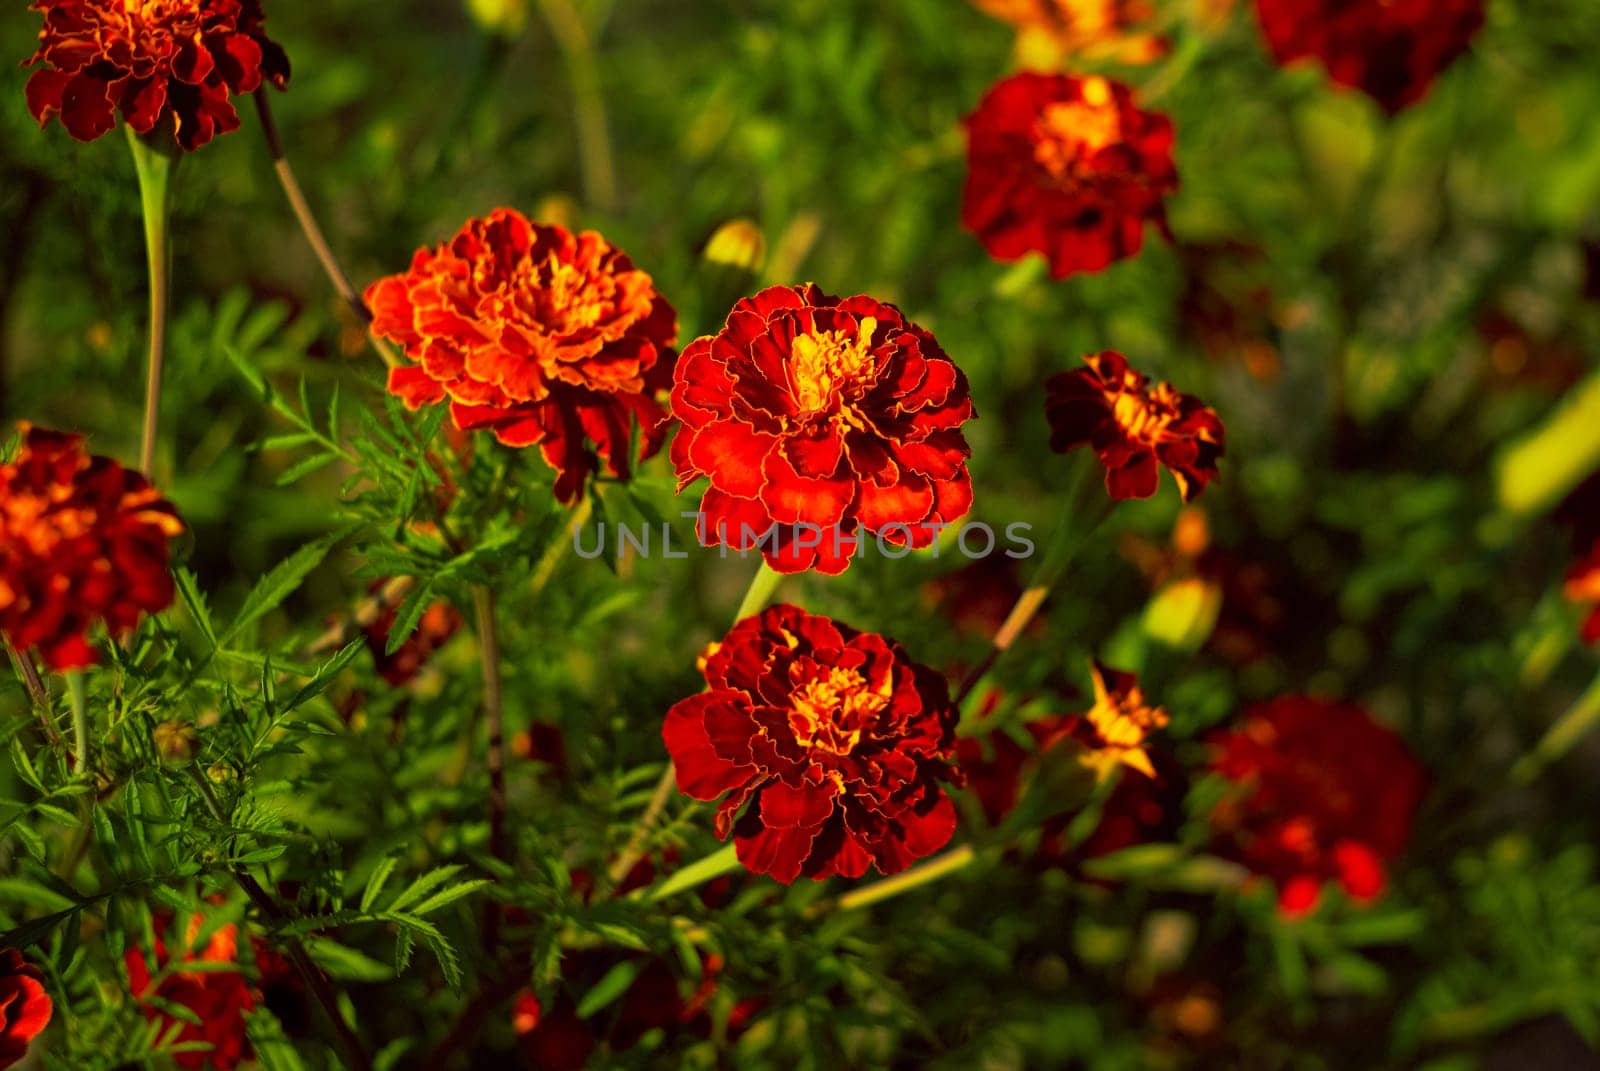 bush of red flowers of calendula on a blurred background among the greenery in the garden